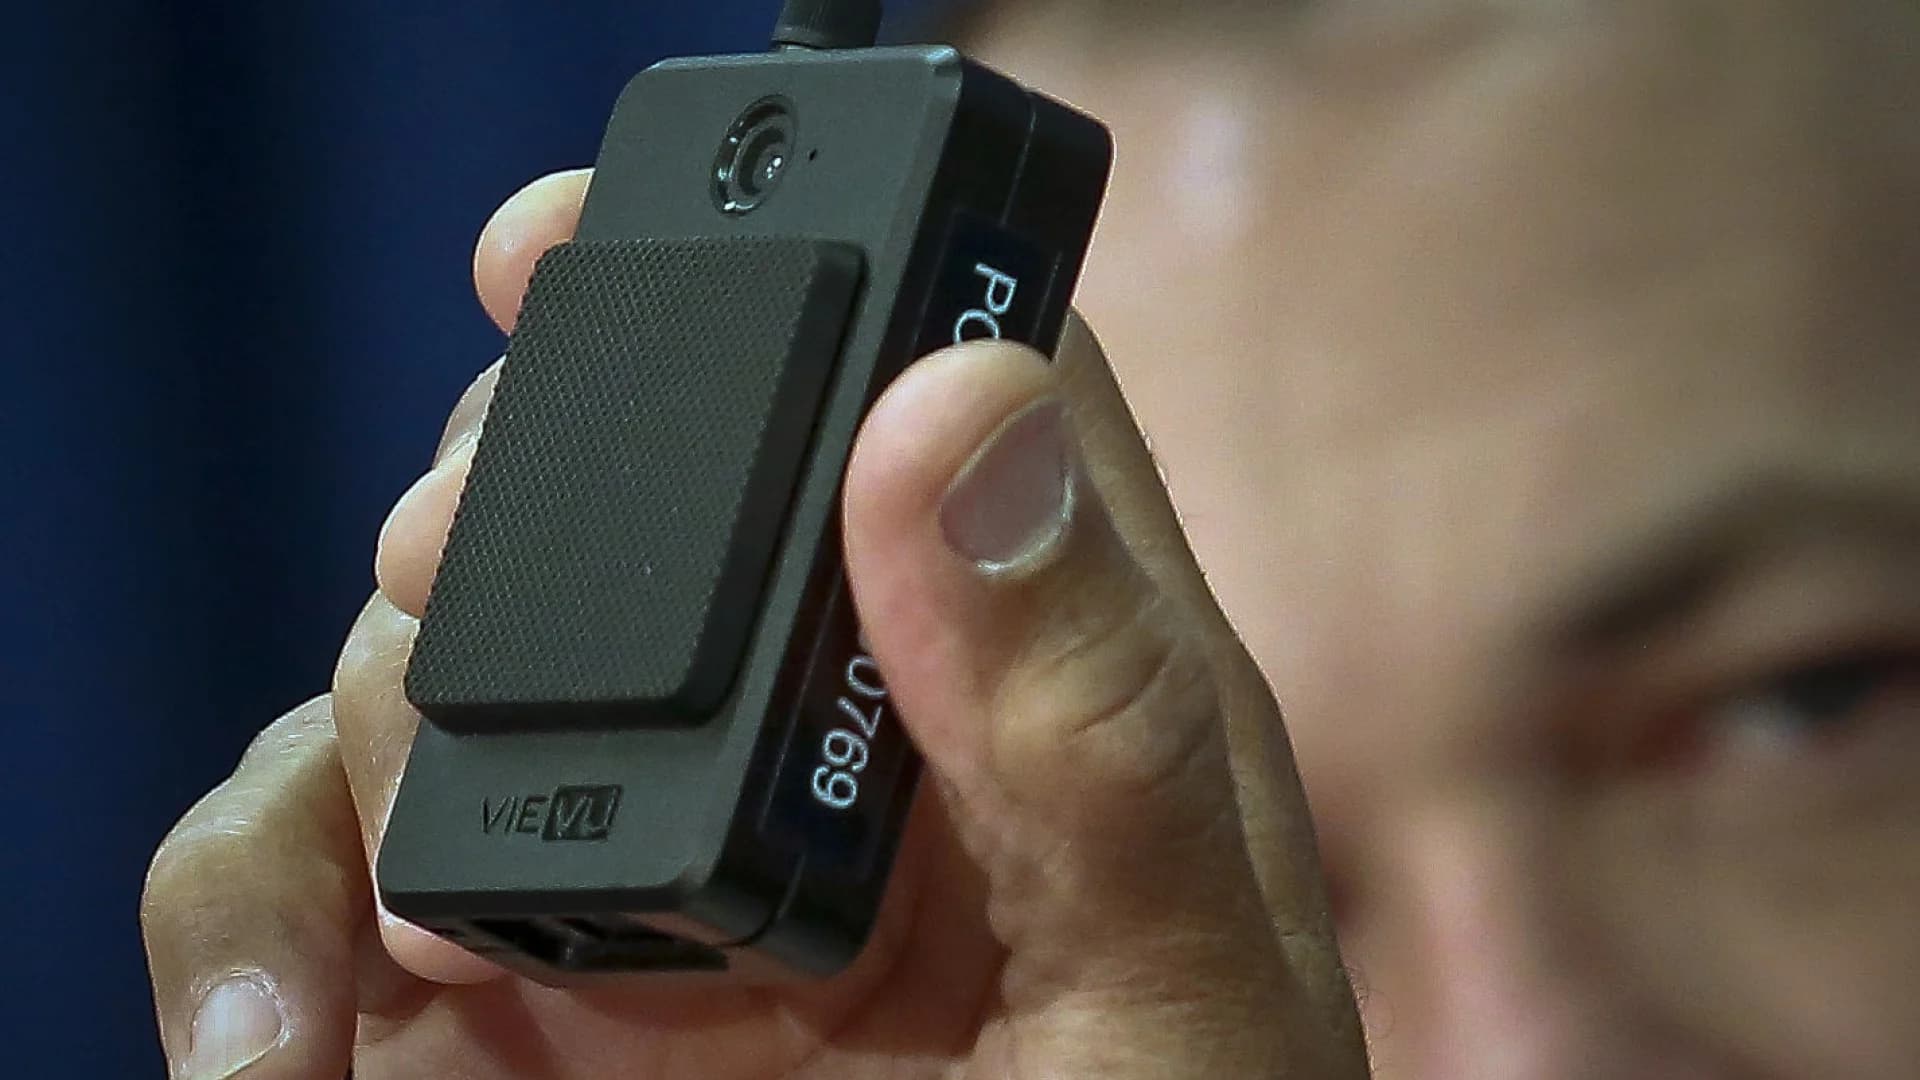 US Homeland Security agents to test use of body cameras